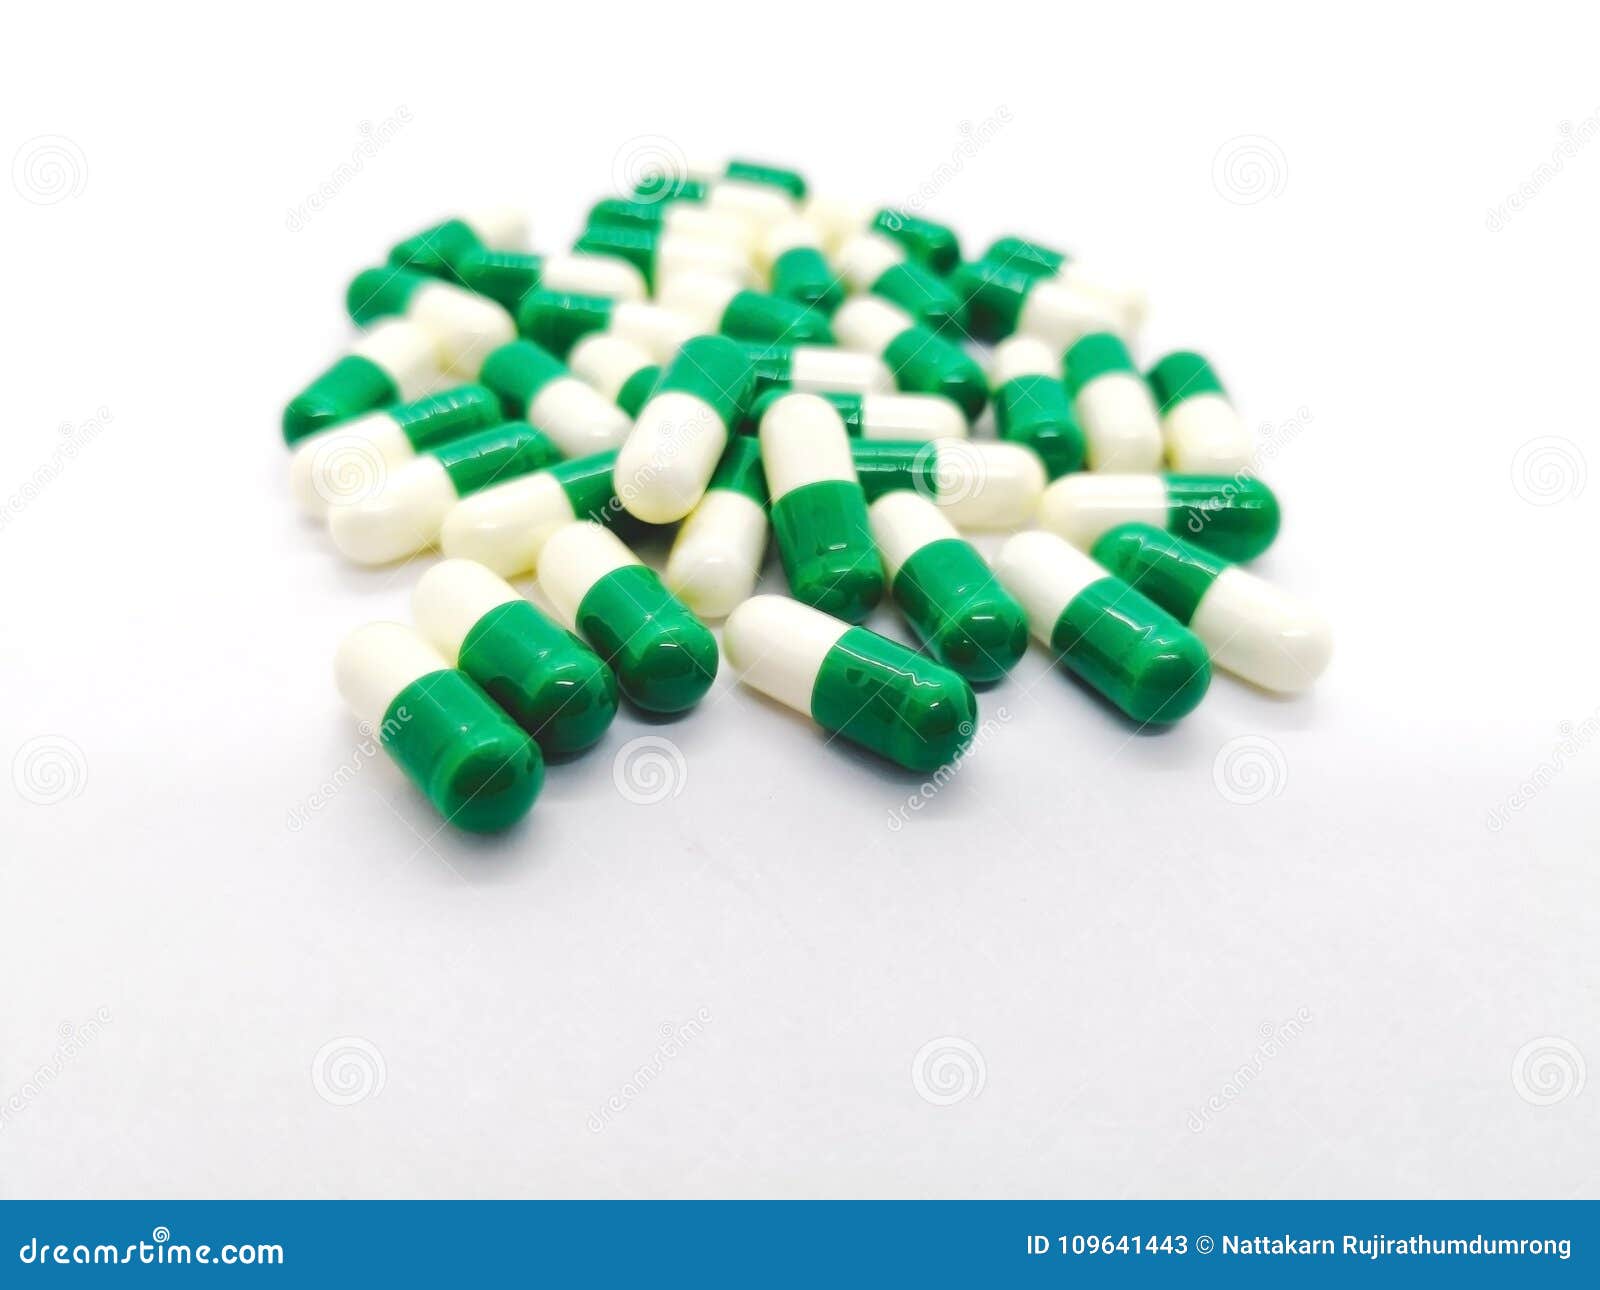 Medication And Healthcare Concept Many White Green Capsules Of Stock Image Image Of Doctor Green